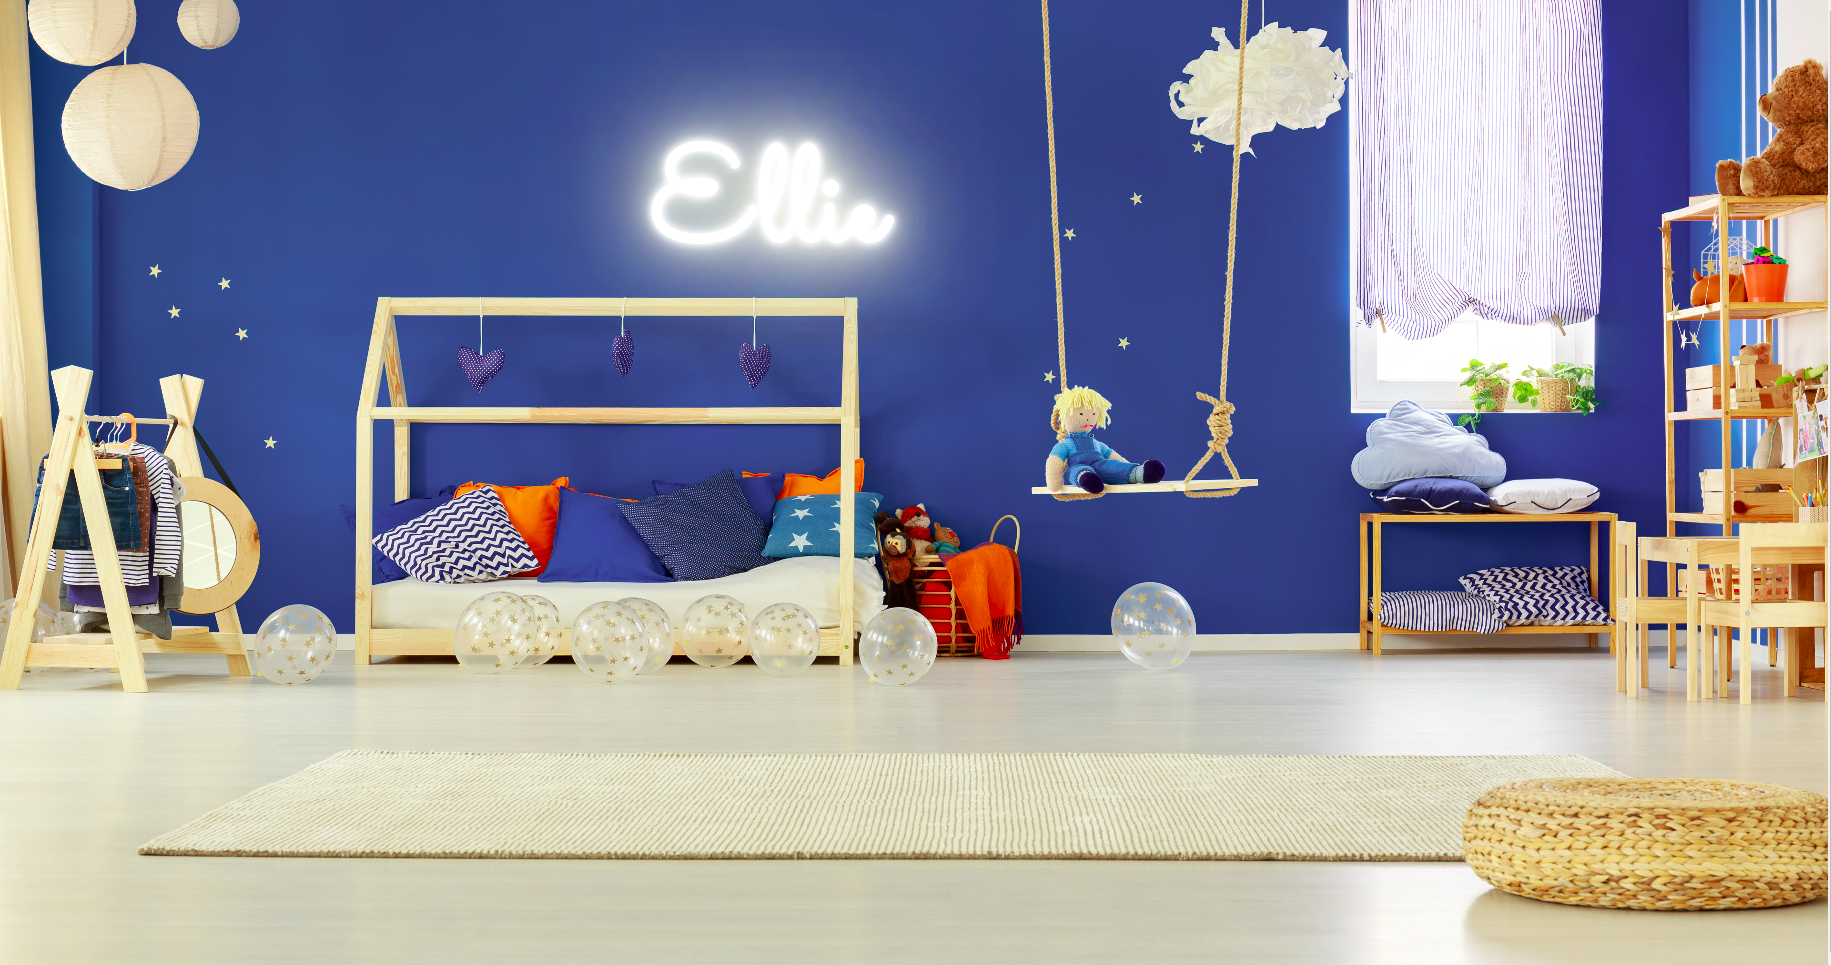 "Ellie" Baby Name LED Neon Sign